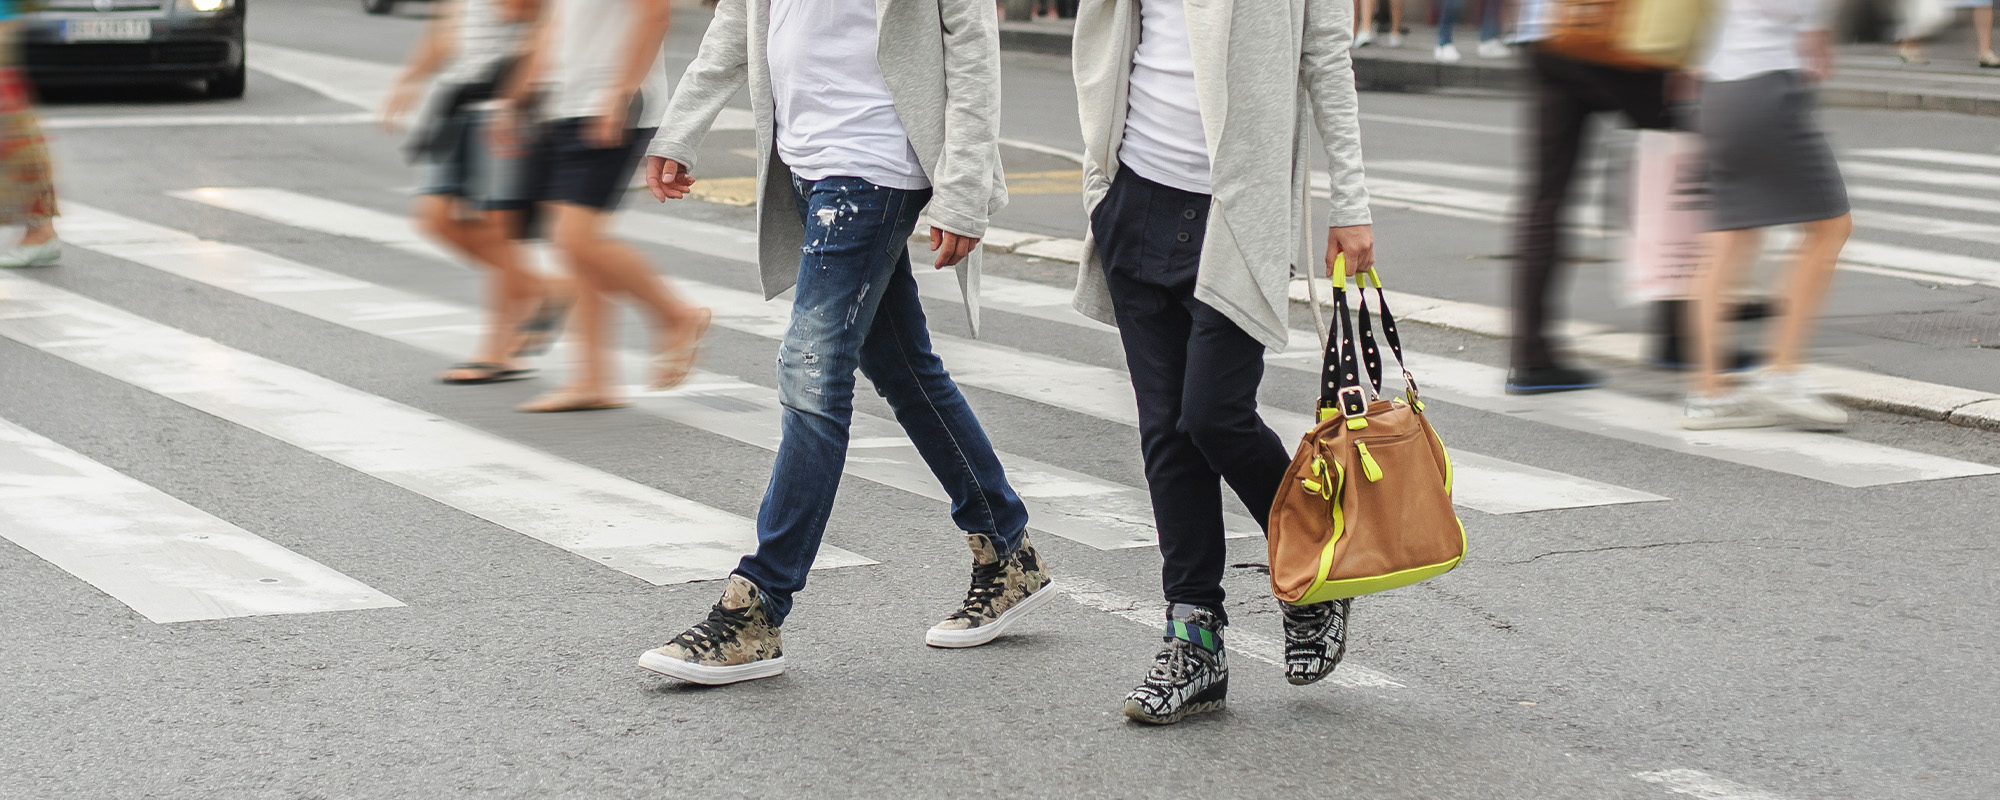 fashionable couple crossing road at pedestrian zebra crossing